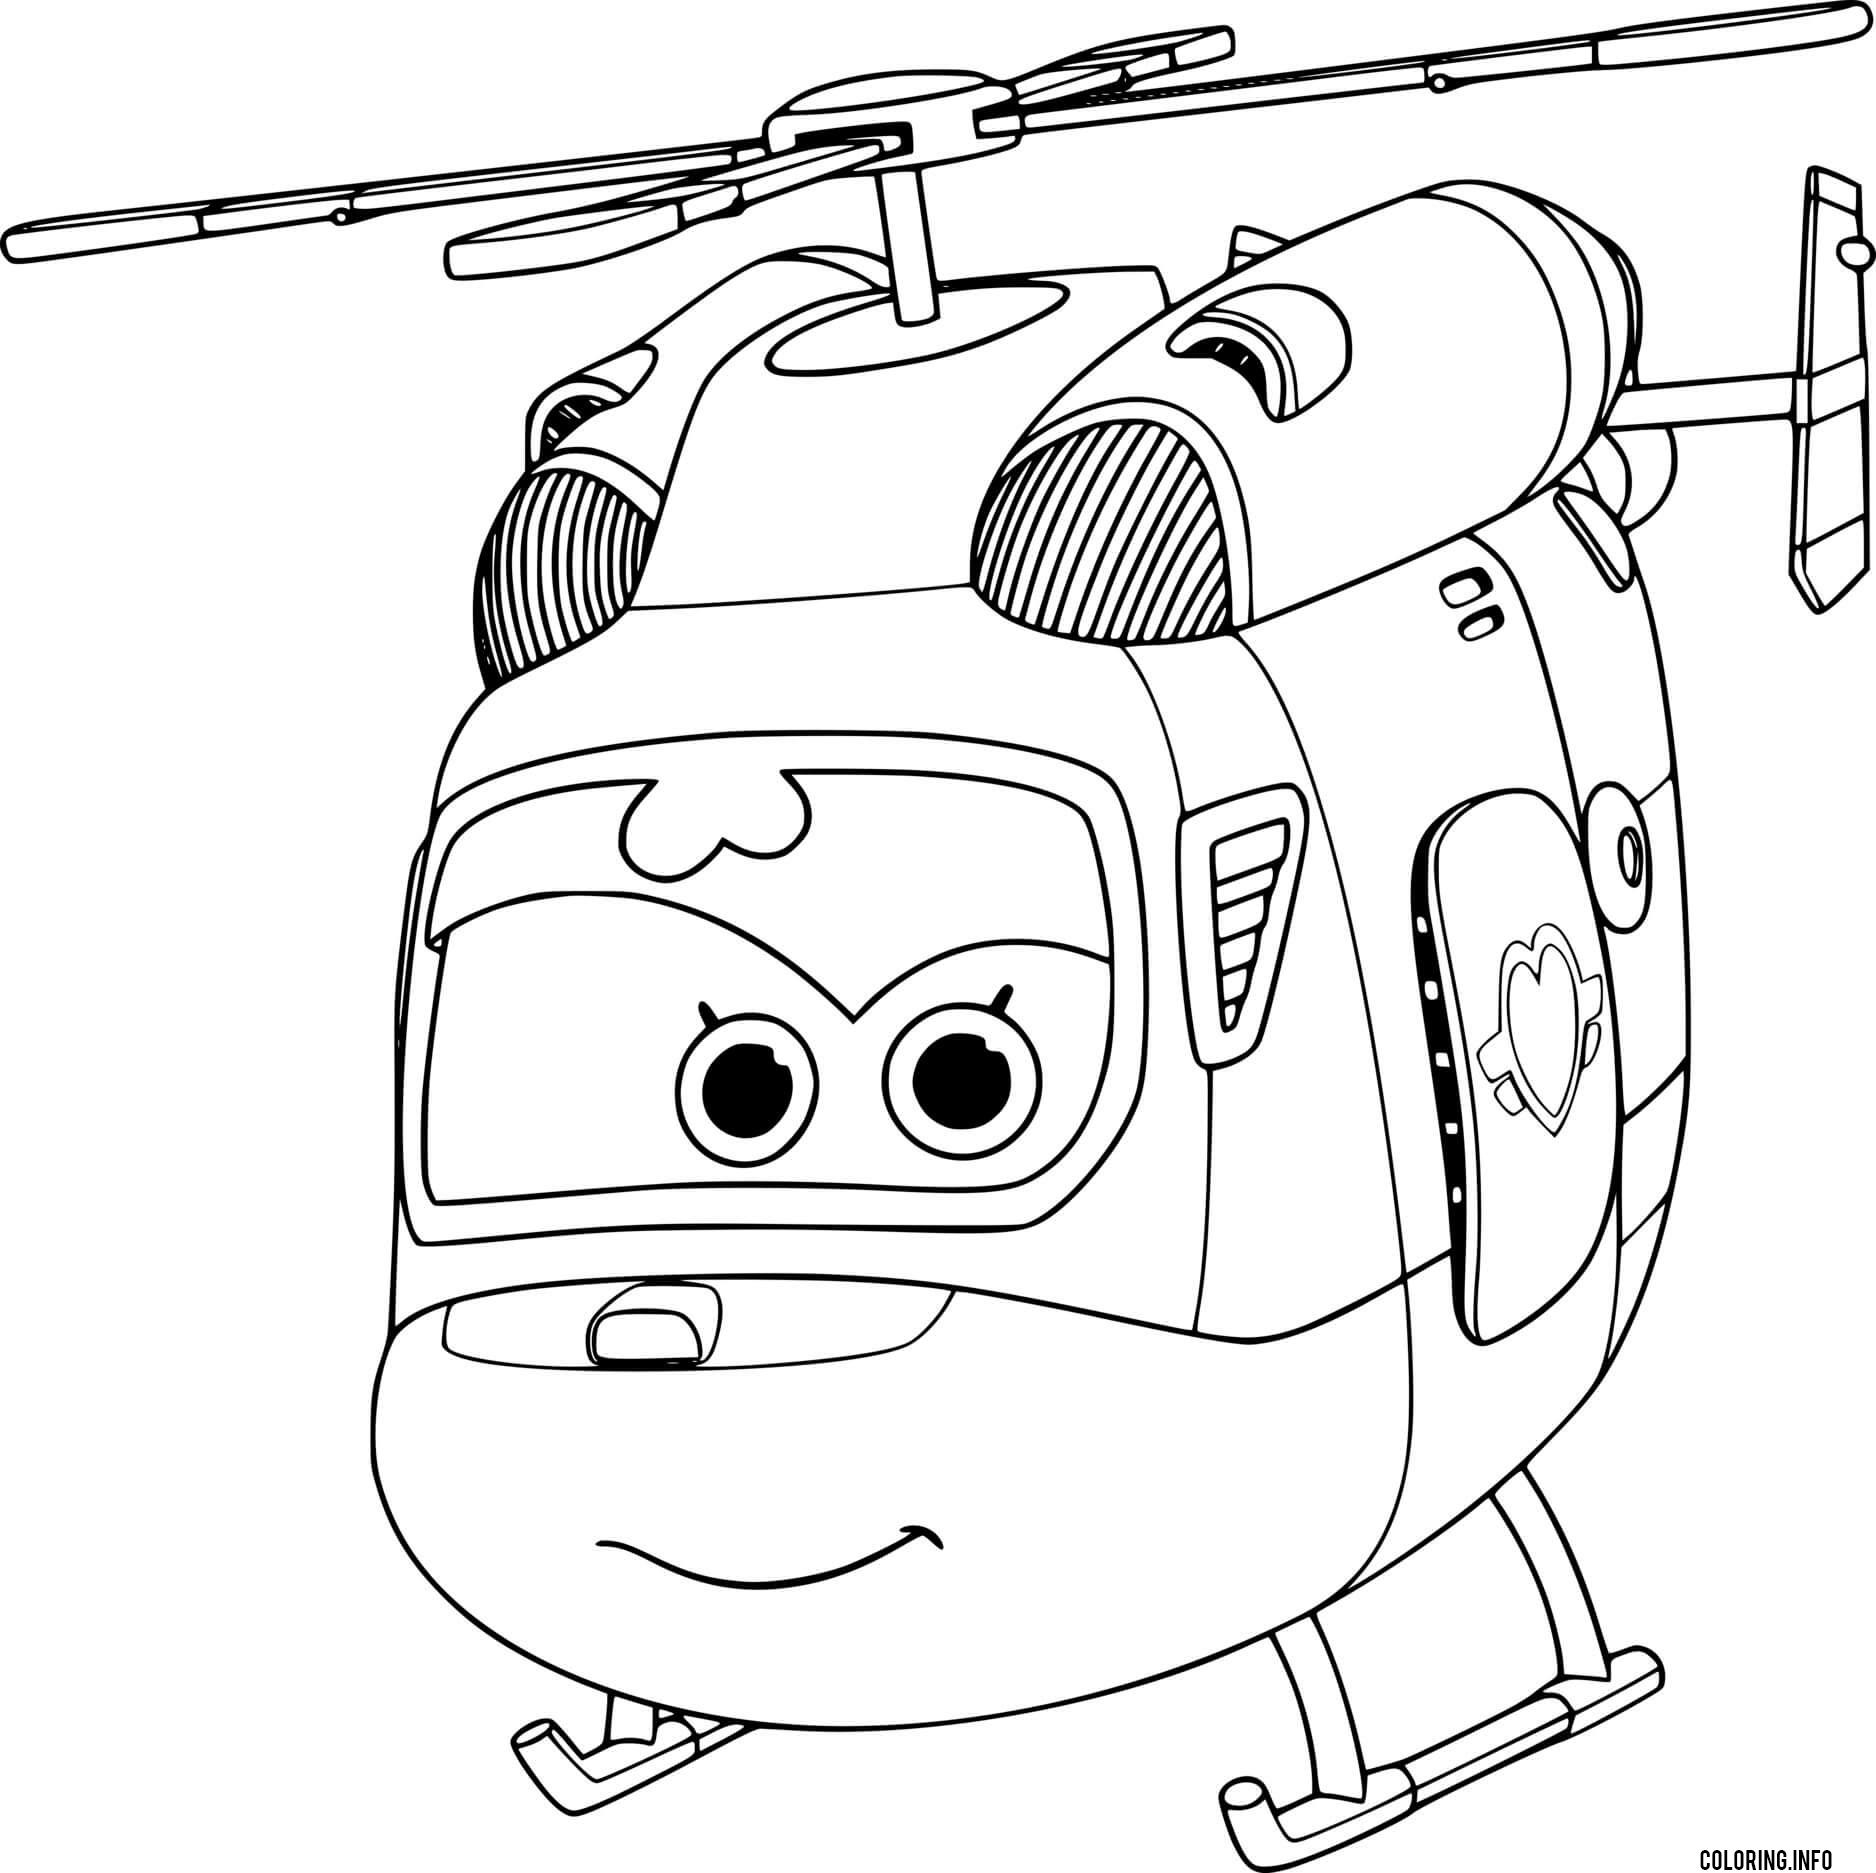 Helicopter Dizzy From Super Wings coloring